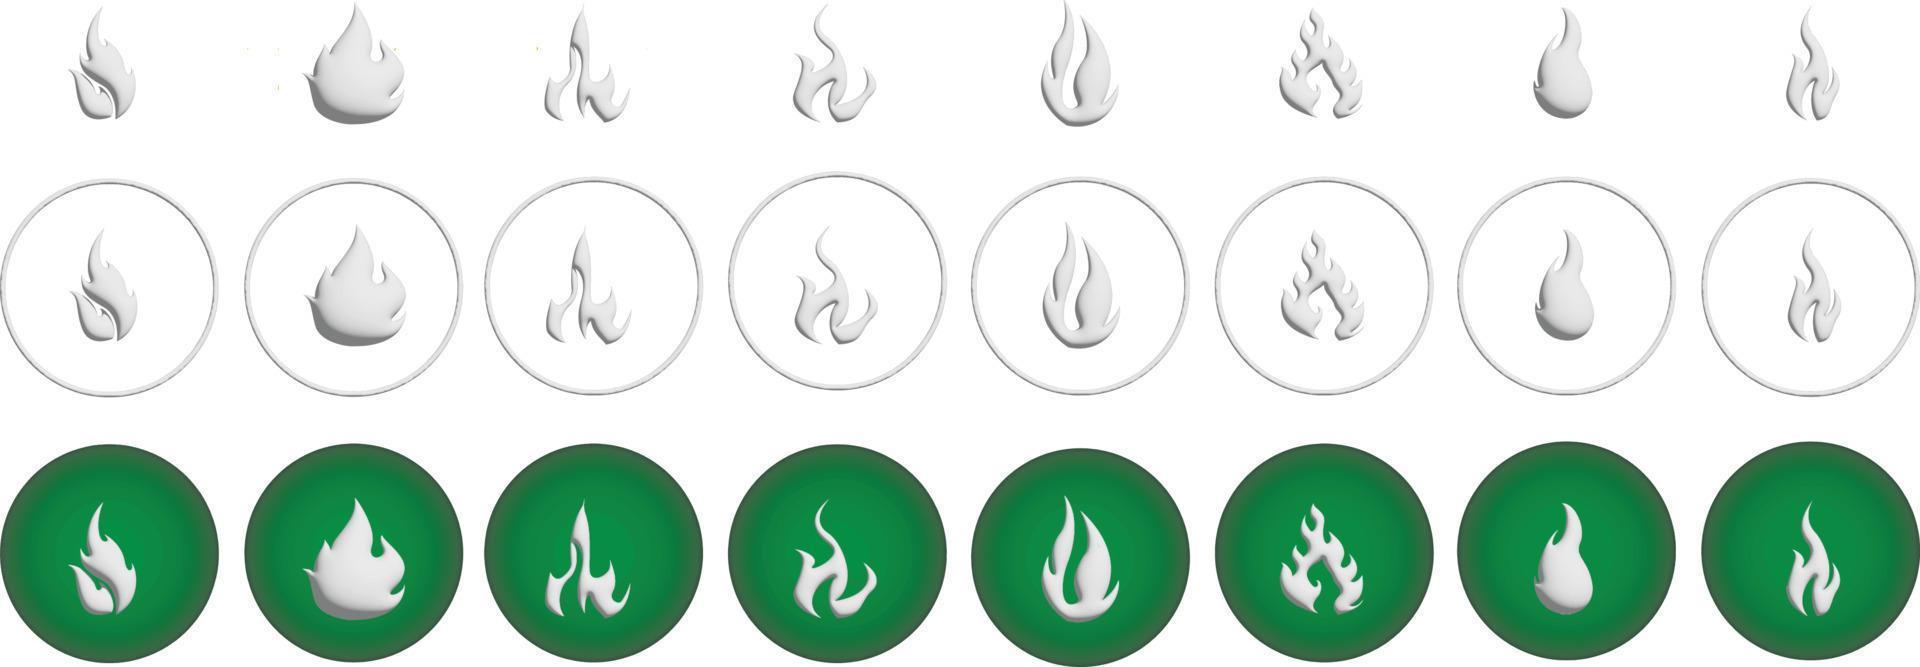 Set of flame icon in flat style. Warming sign user interface. Vector illustration